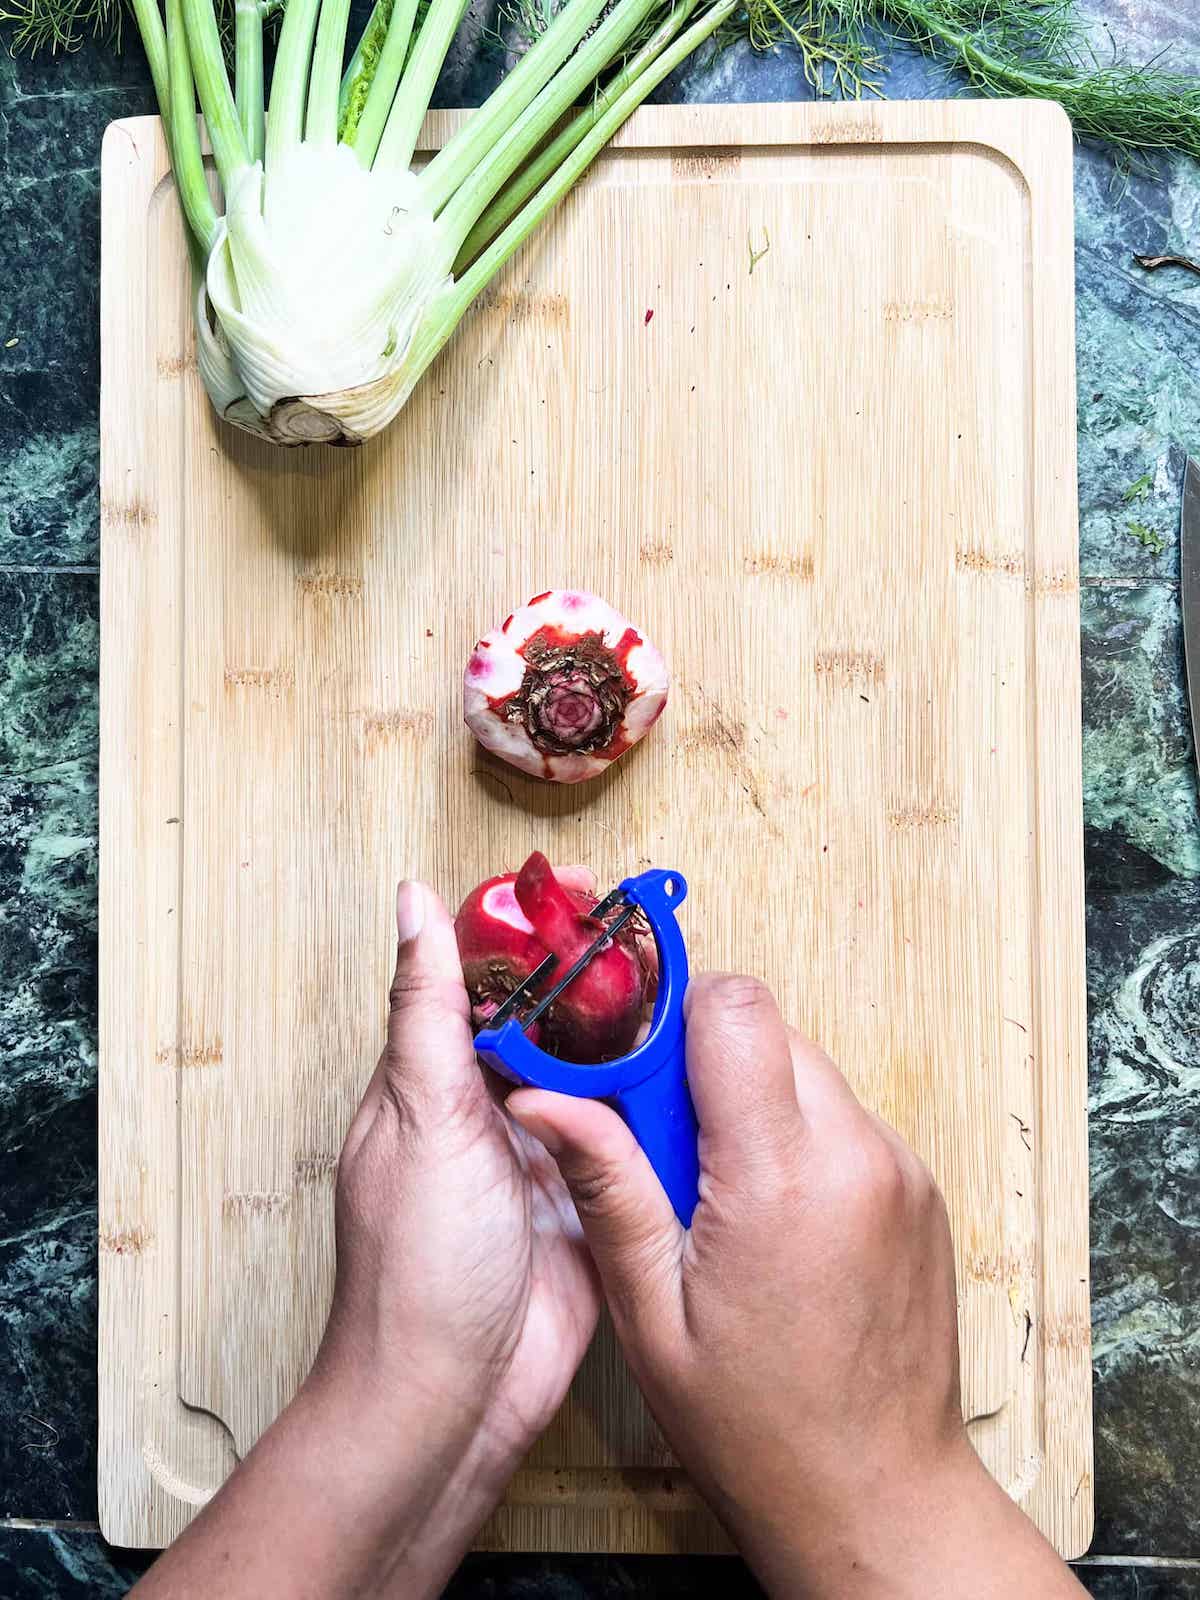 Brown hands peeling Chioggia beets with a blue vegetable peeler.